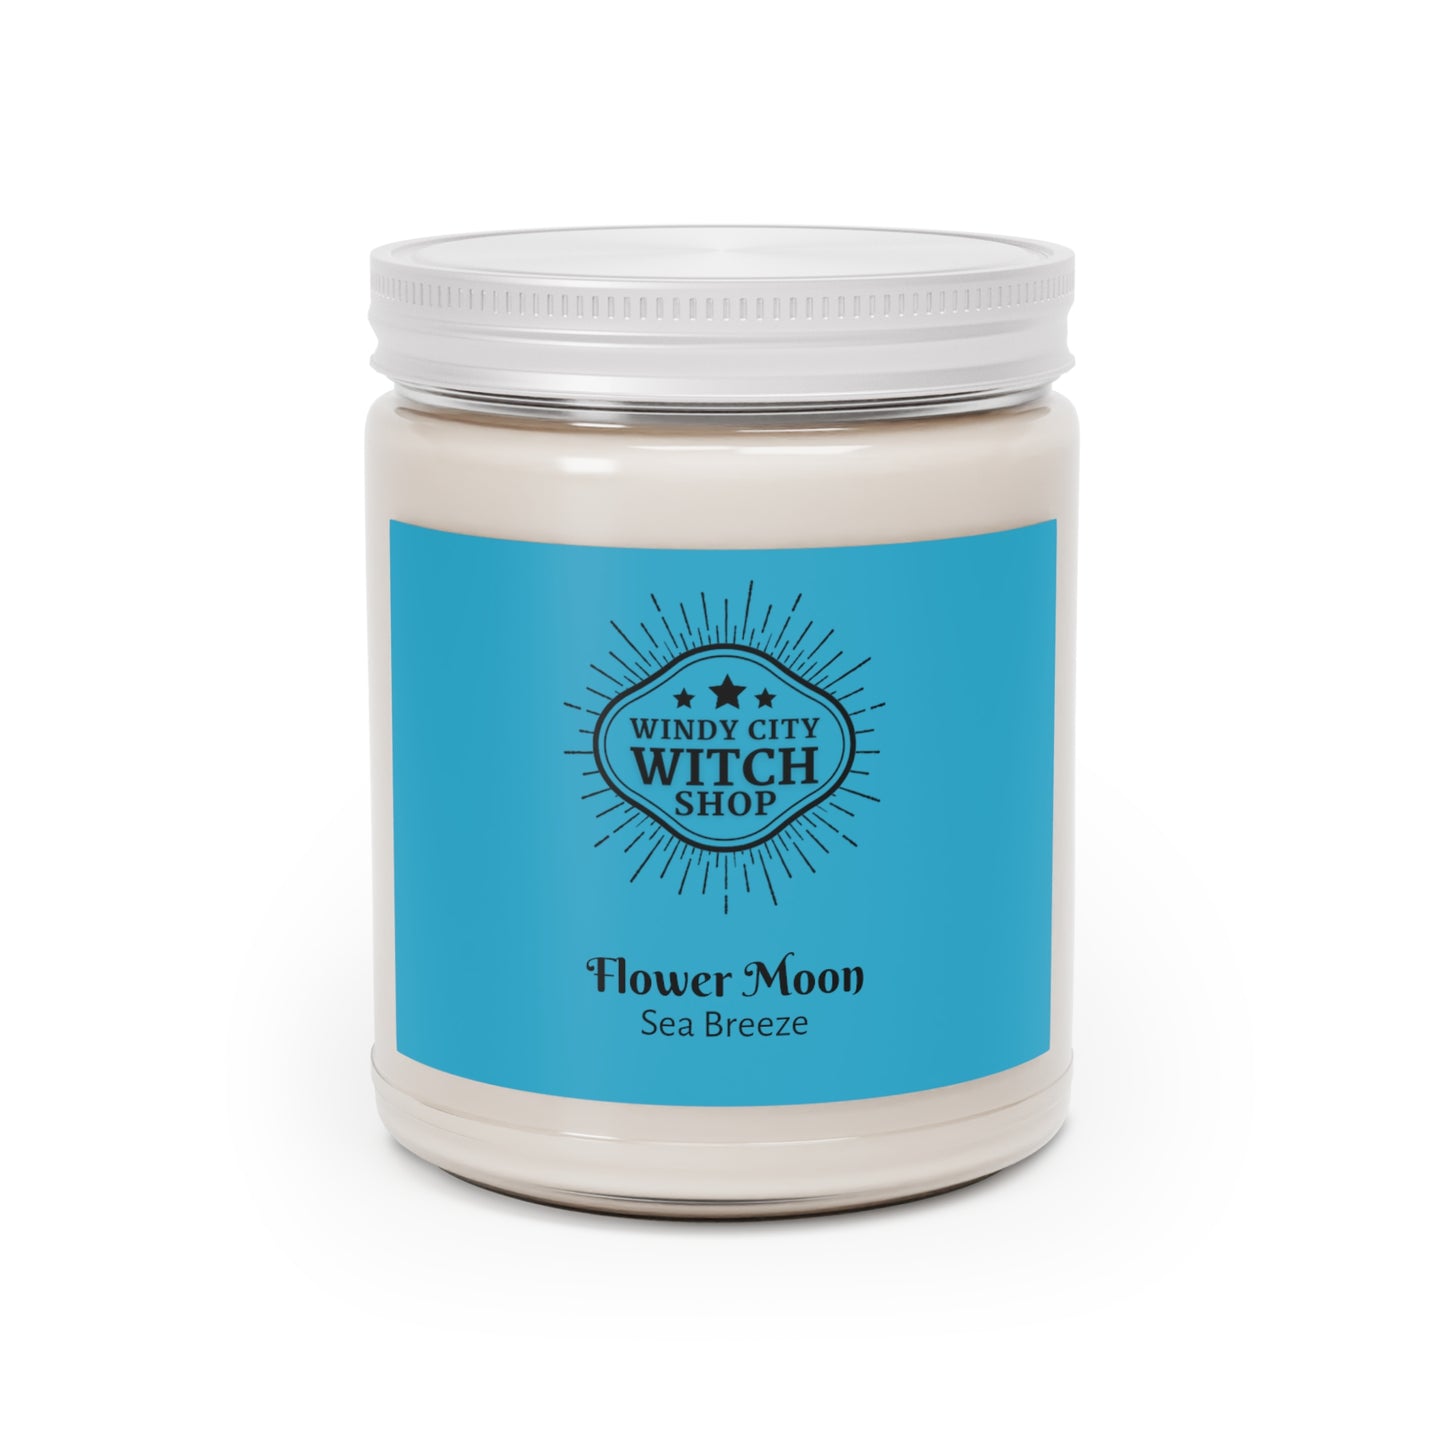 Flower Moon candle, scented